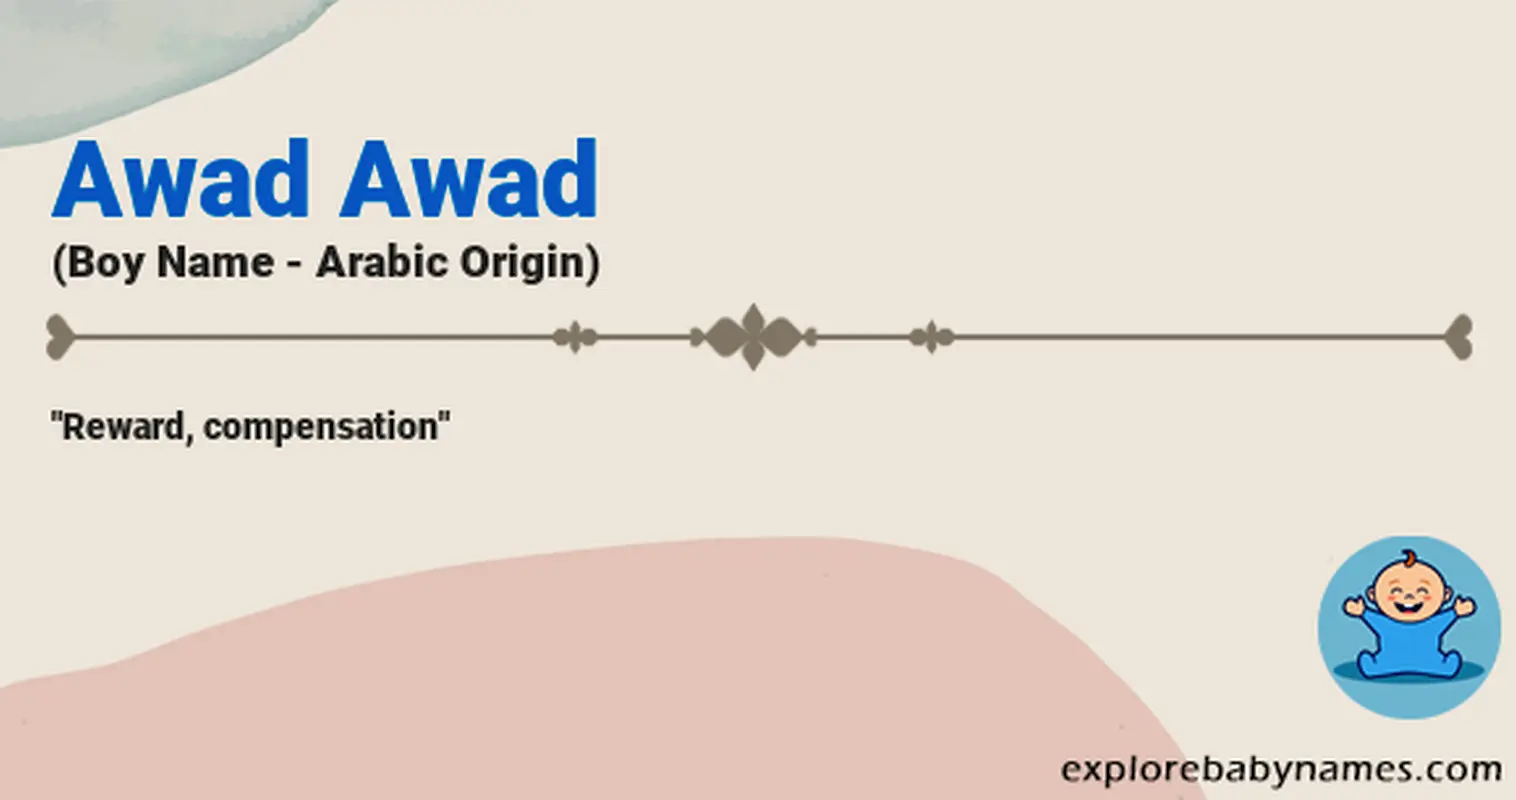 Meaning of Awad Awad